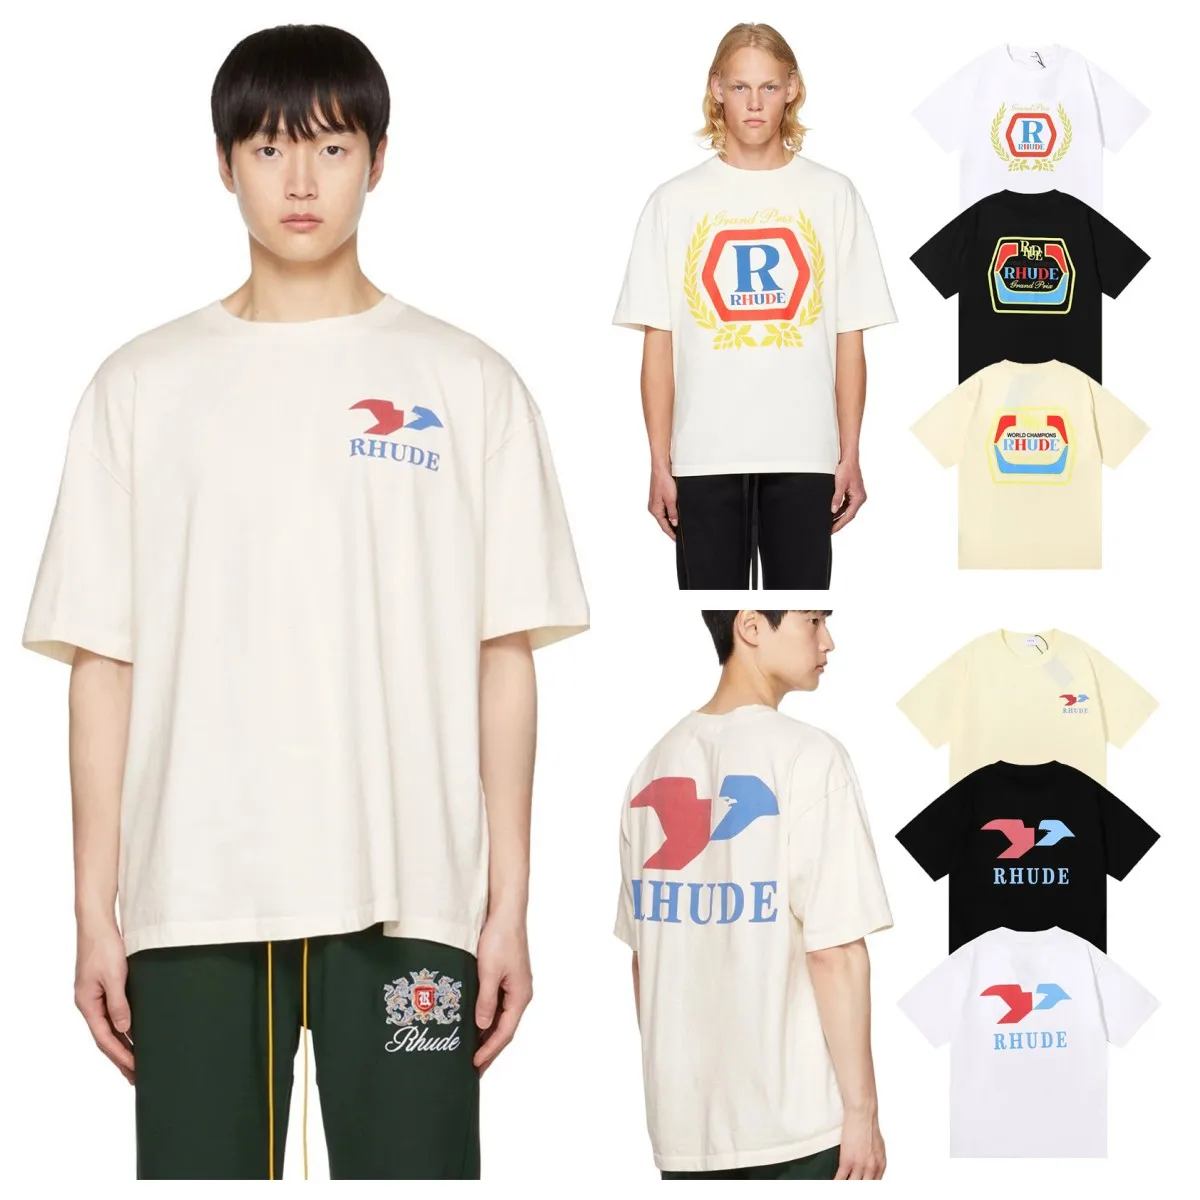 

Rhude Simple Printed Short Sleeve T-shirt Of America High Quality Cotton For Men Women